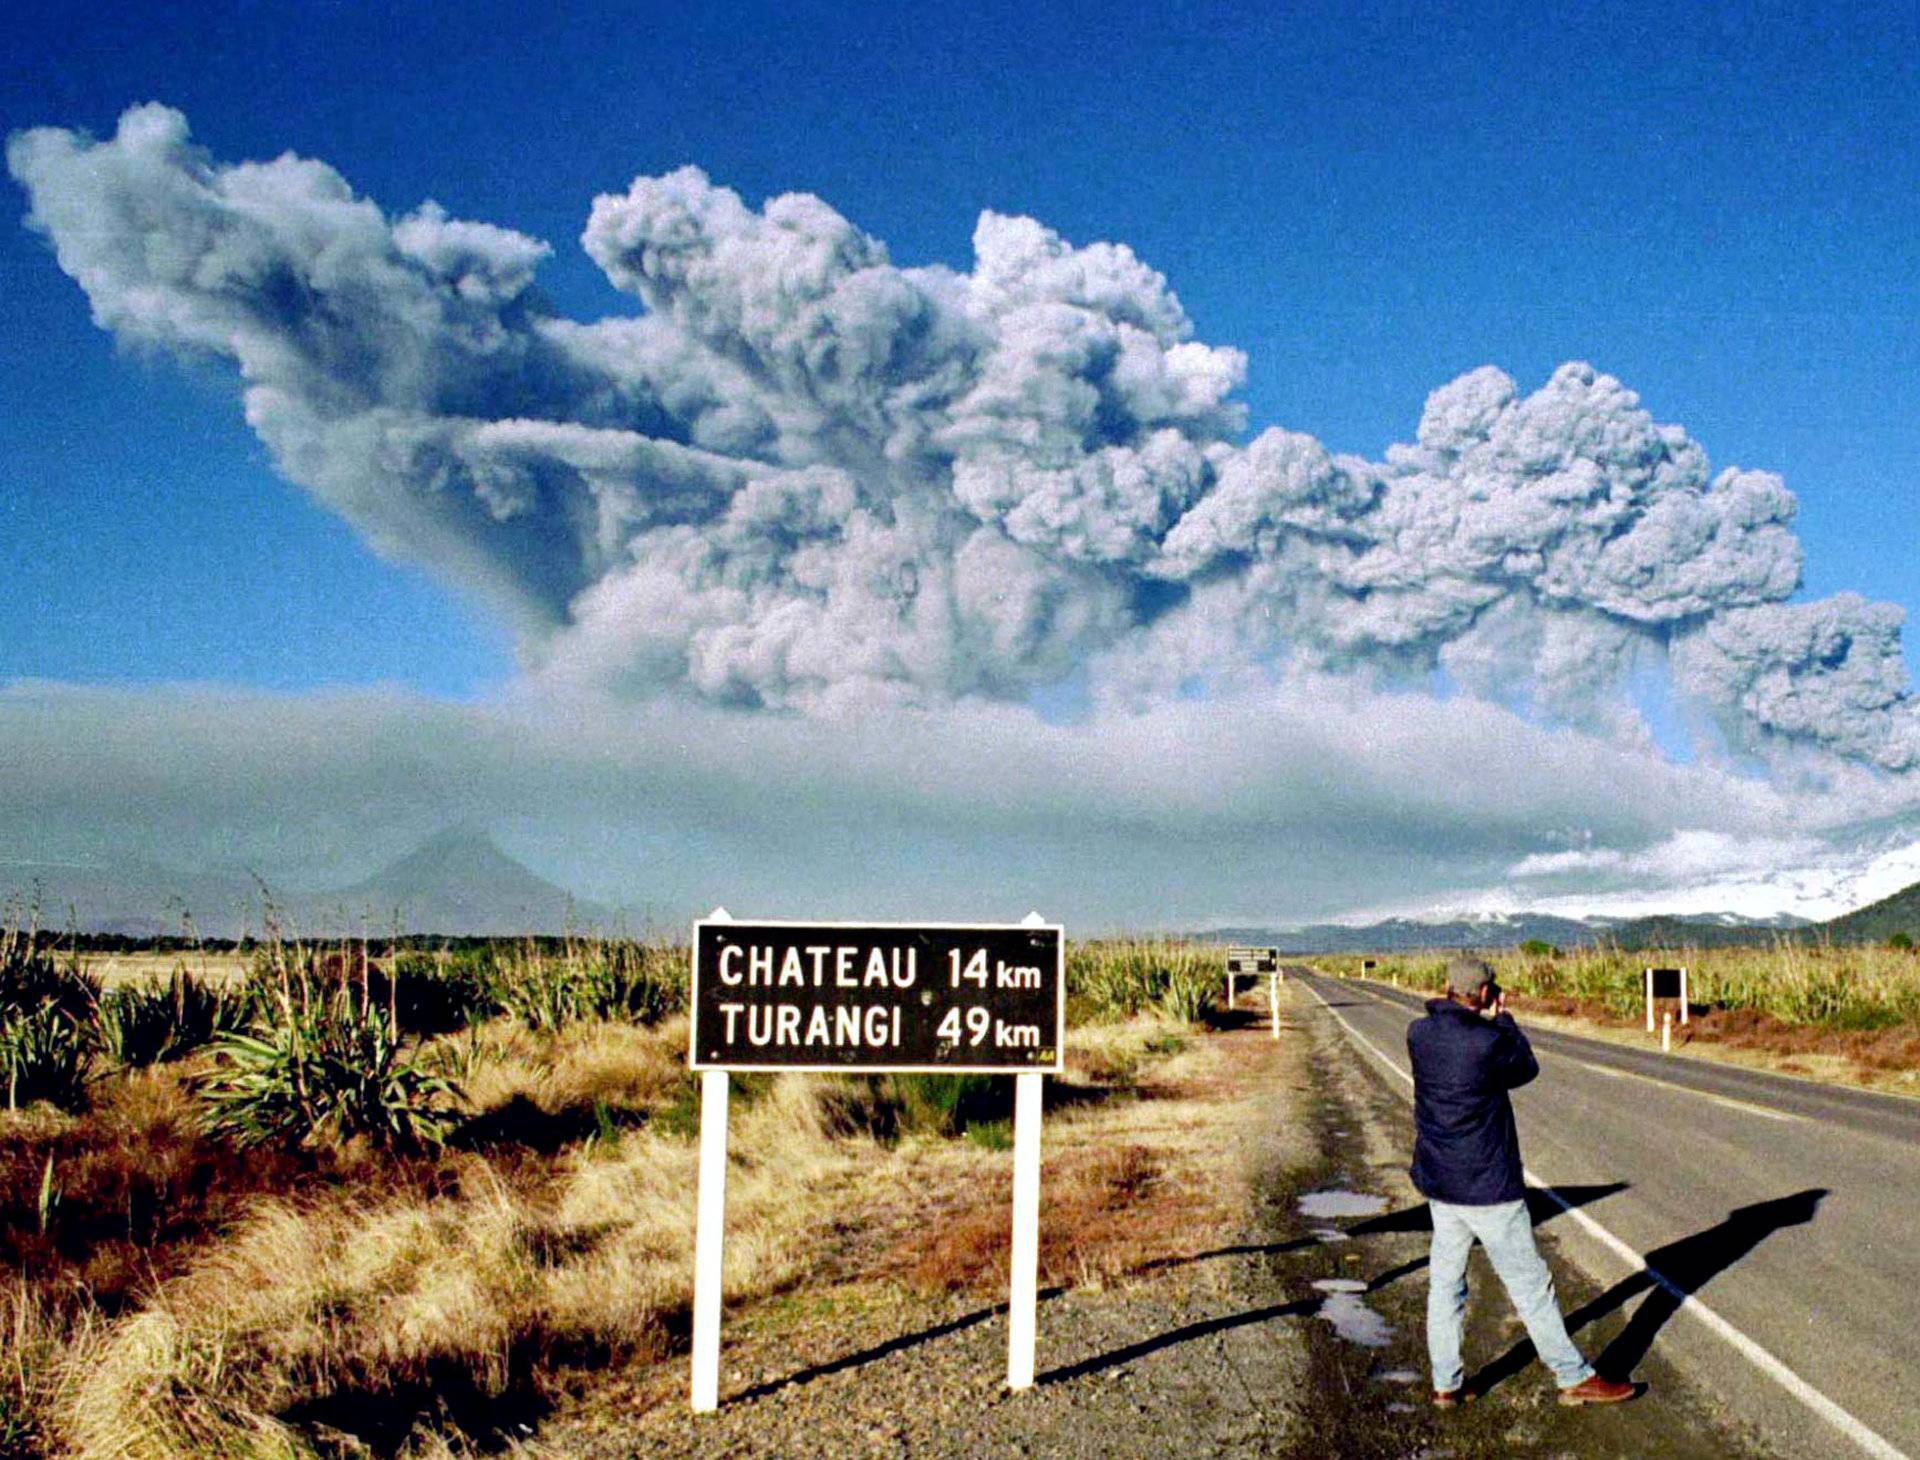 A tourist takes pictures of Mount Ruapehu as it erupts on June 18, 1996 in Tongariro National Park on the central North Island of New Zealand